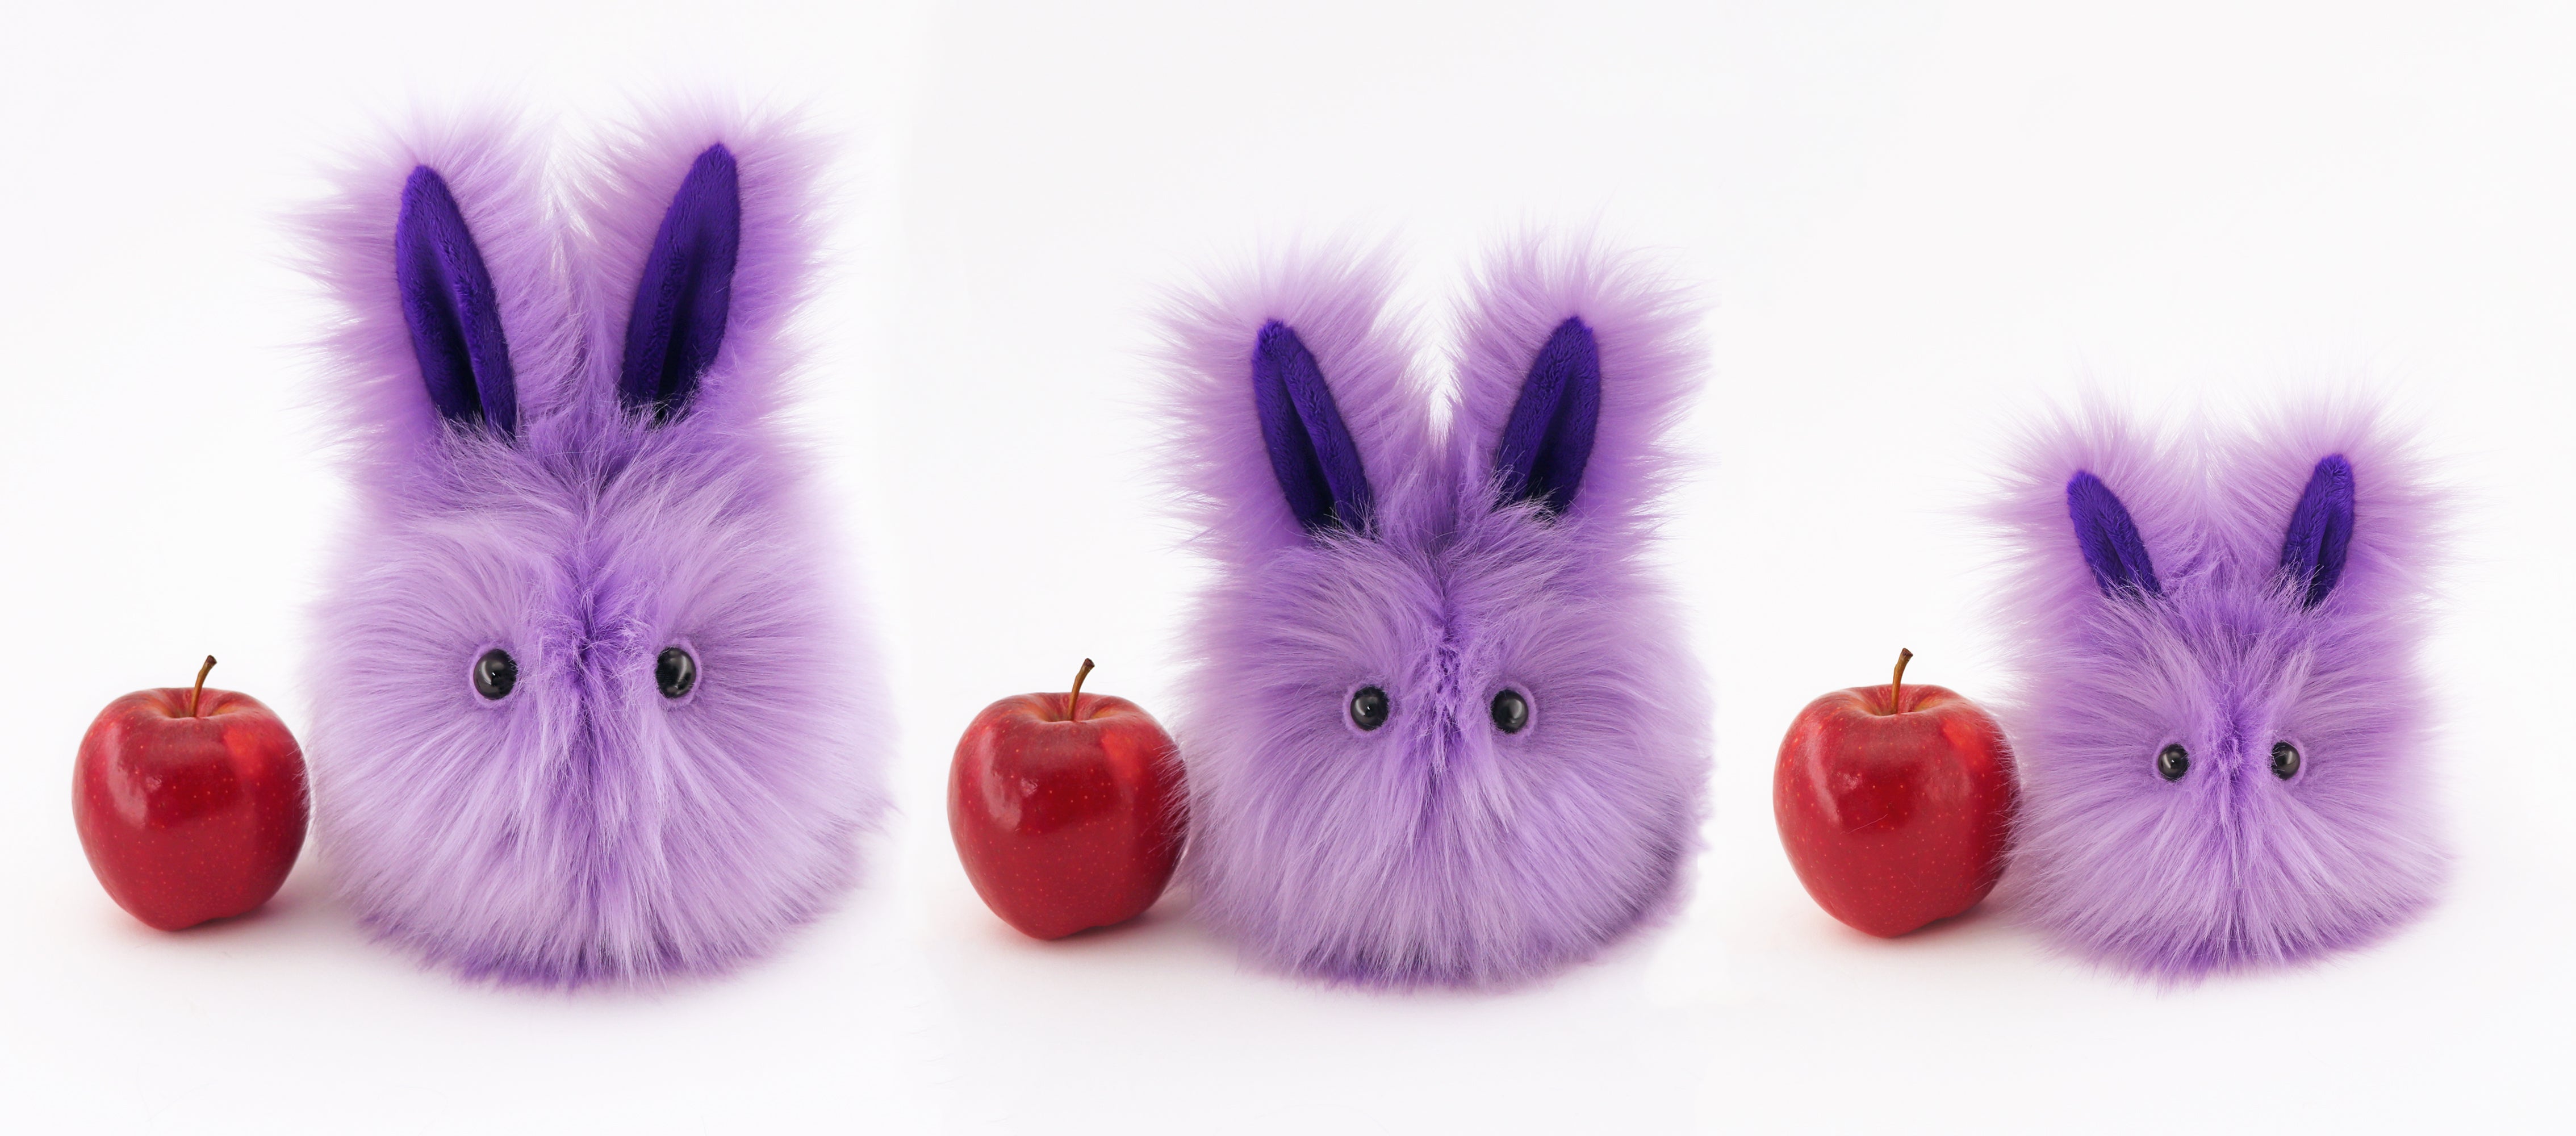 Lavender the Easter bunny plush toy, group view with apple showing scale.